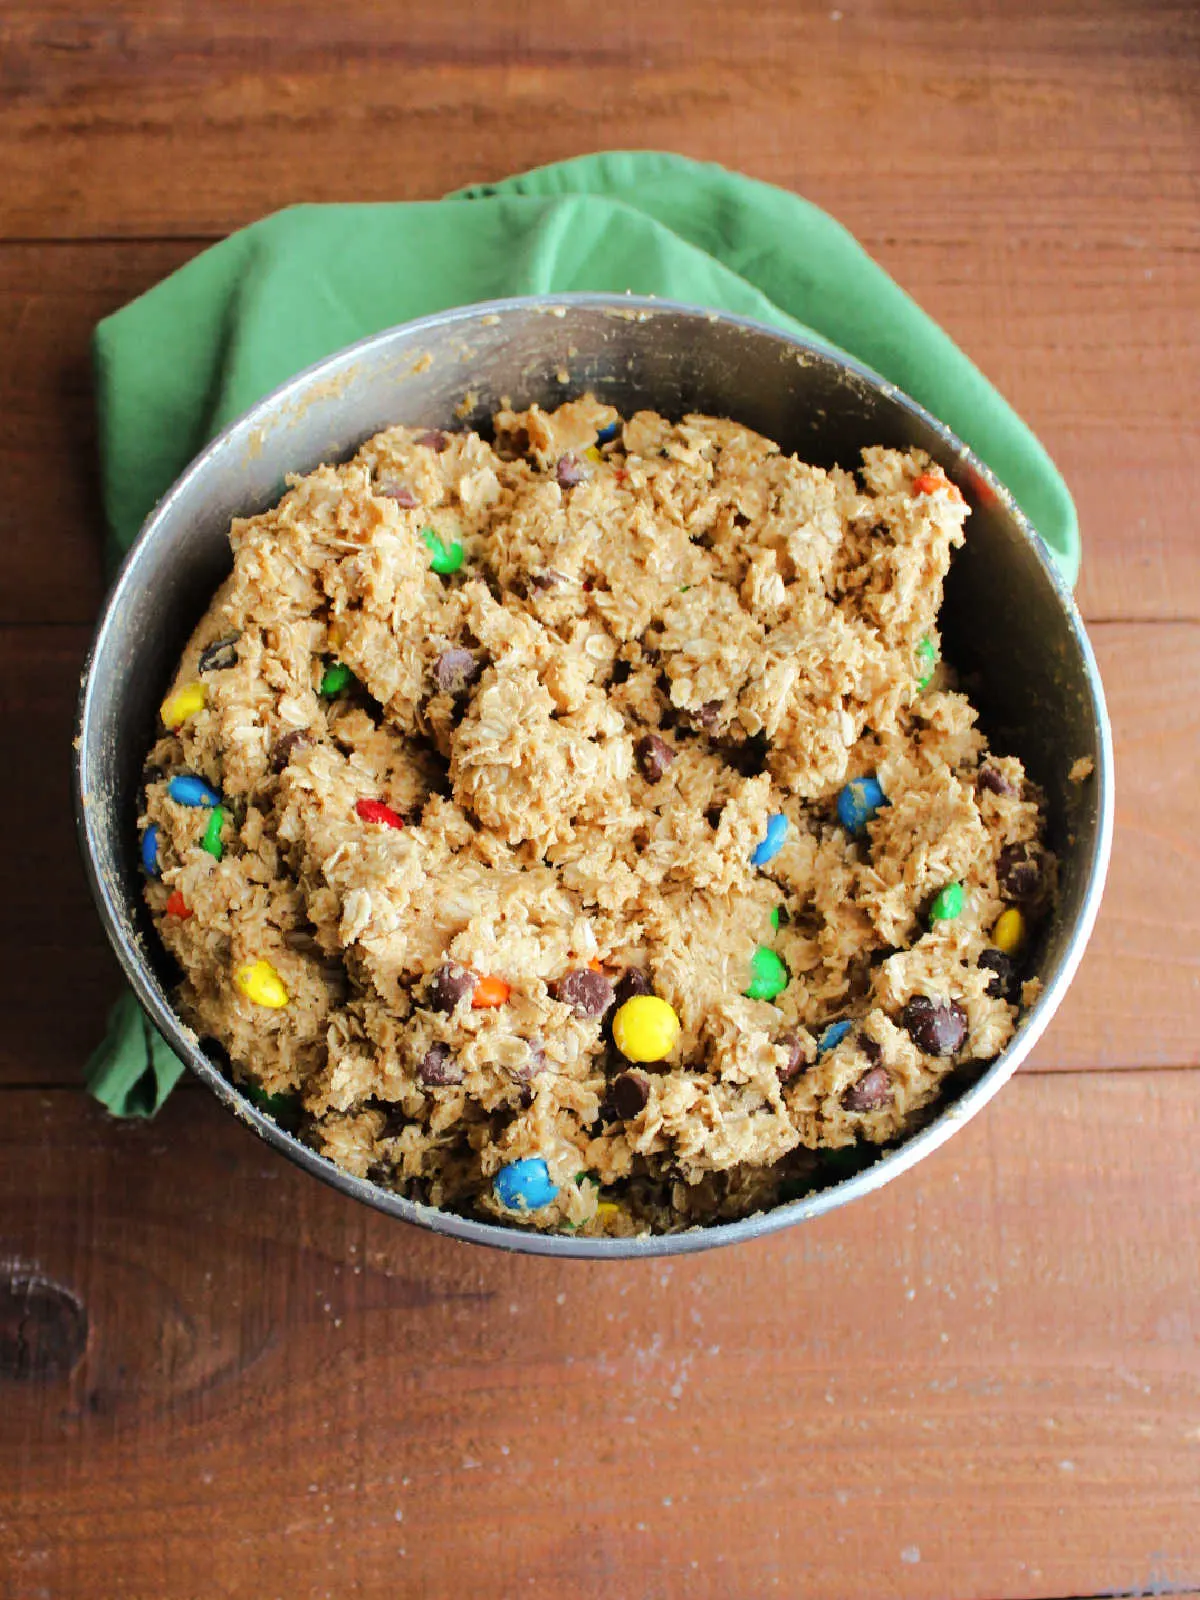 Mixer bowl filled to the brim with monster cookie dough featuring peanut butter, oatmeal, and chocolates.